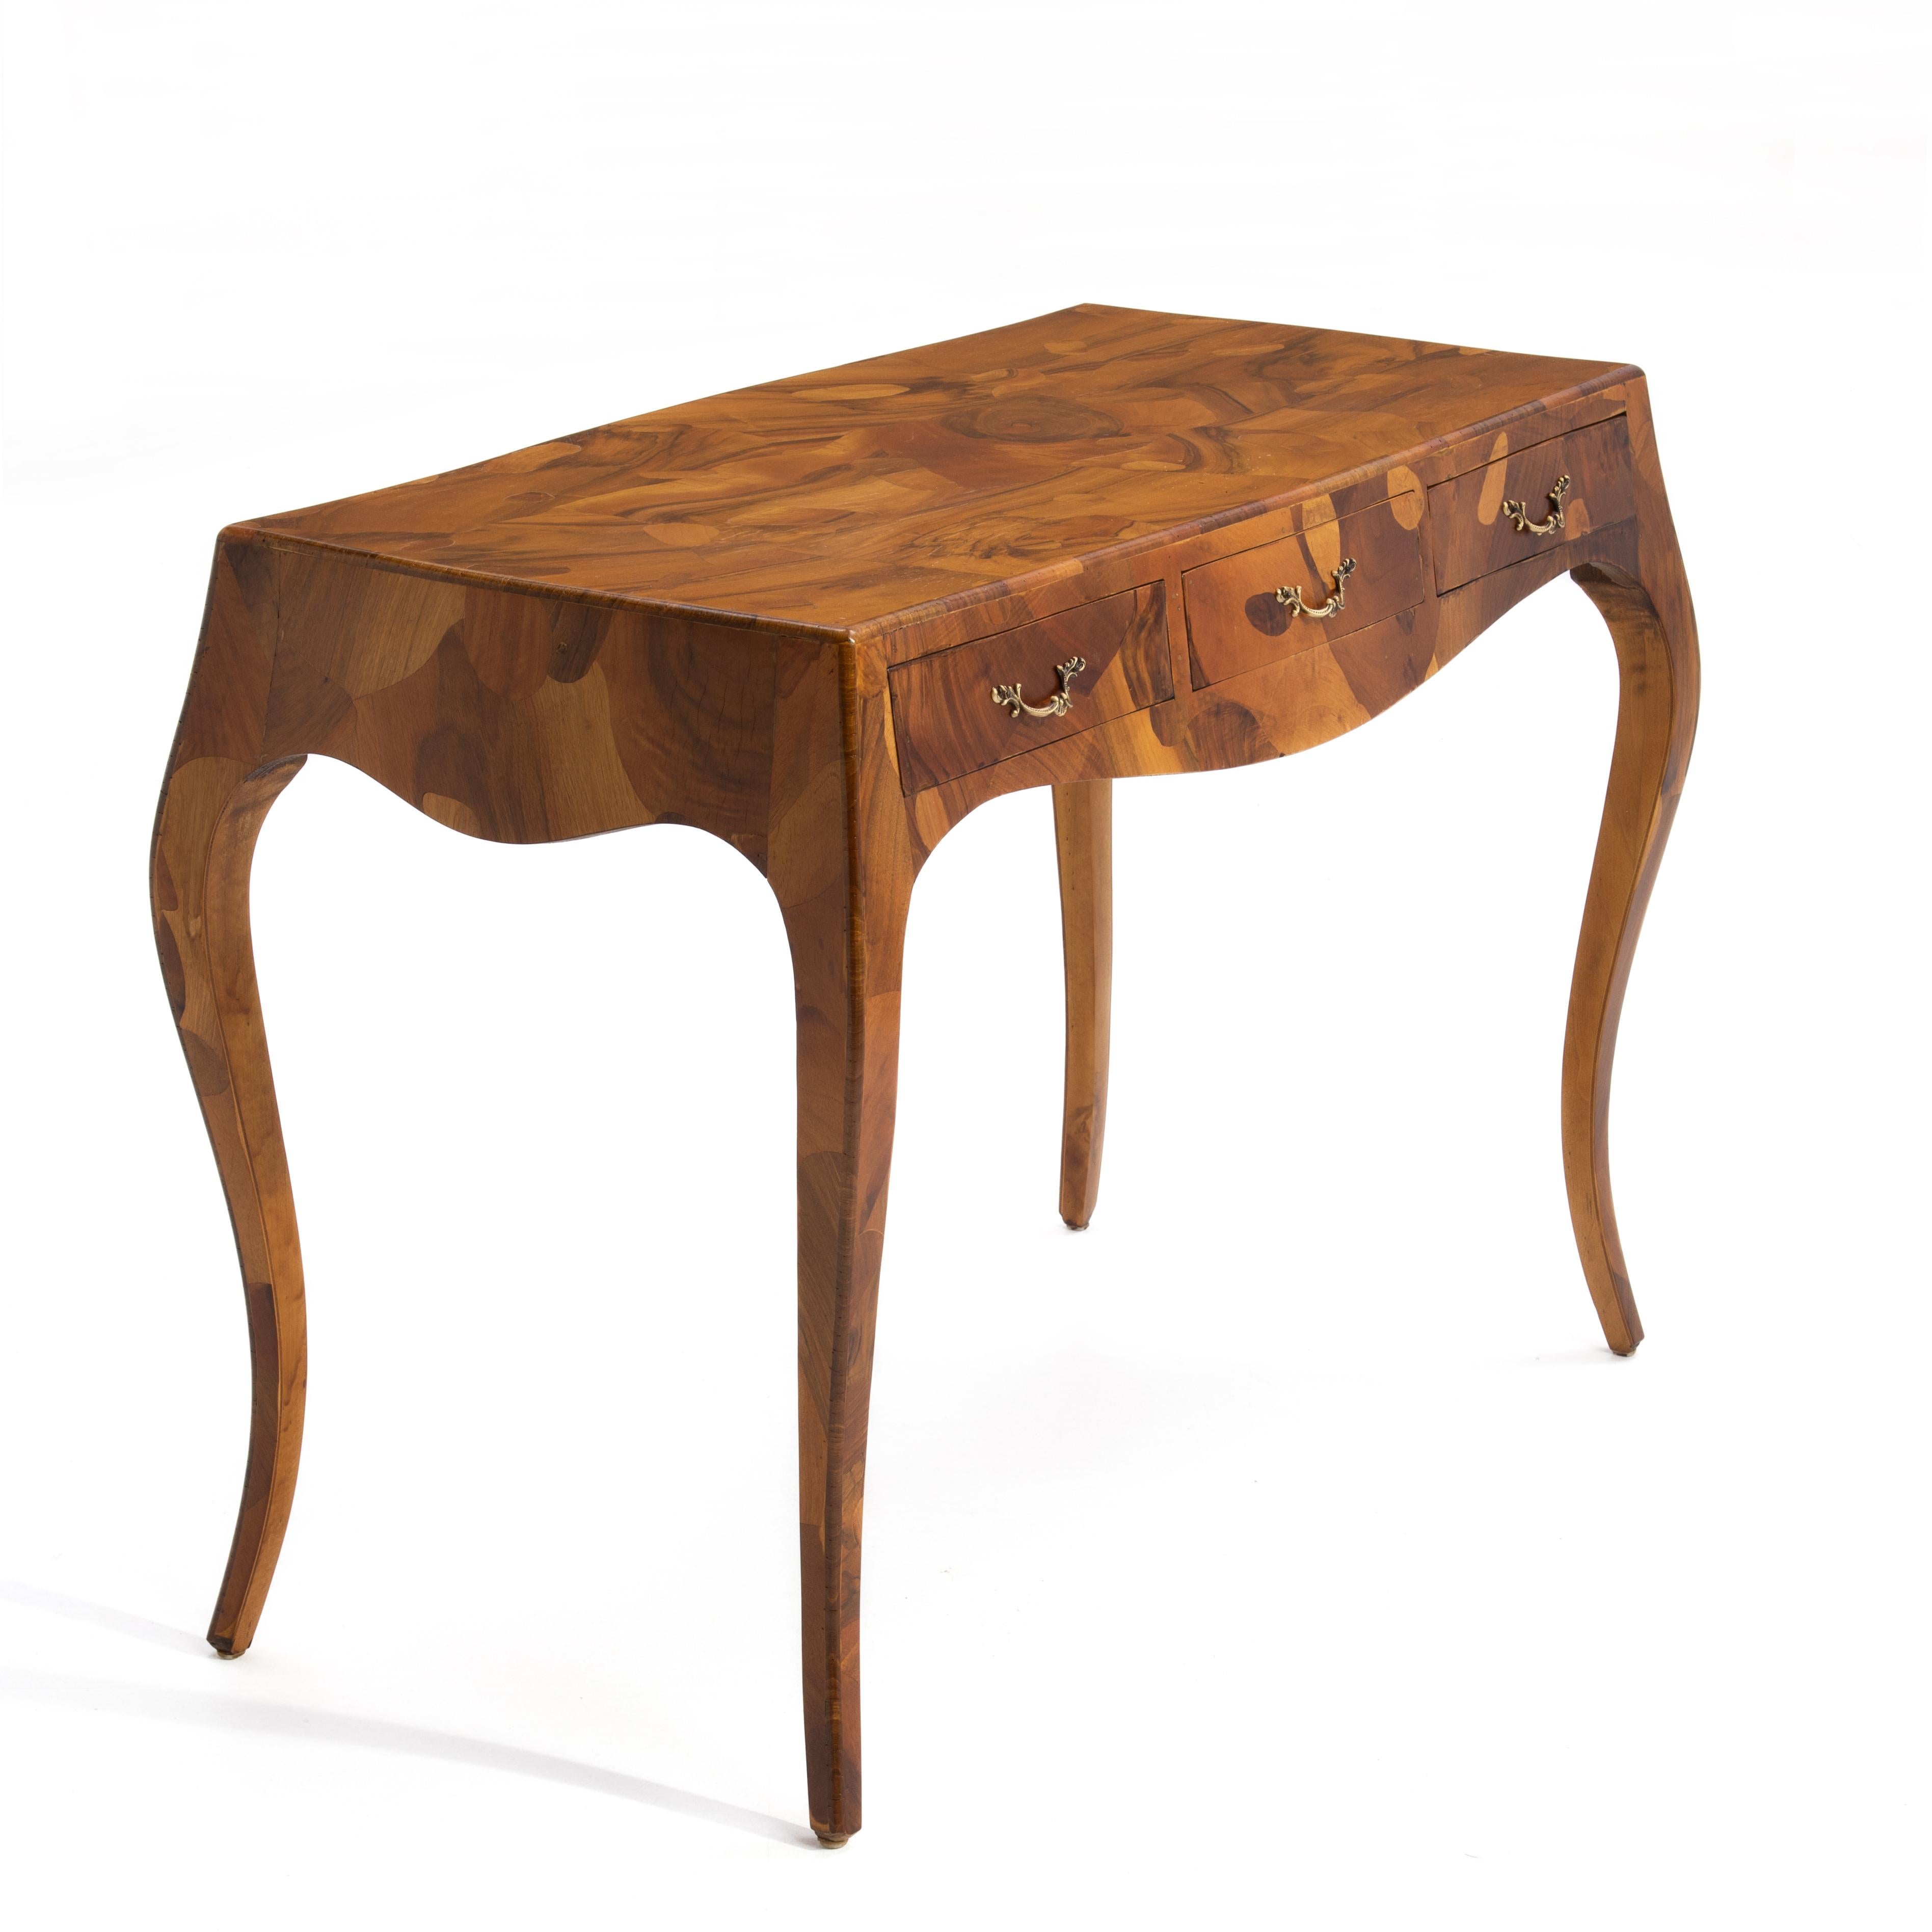 An Italian Mid-Century oyster burl olive wood three drawer writing table or desk. Brass hardware. Cabriole legs. Stunning.

The writing surface is 39 1/4